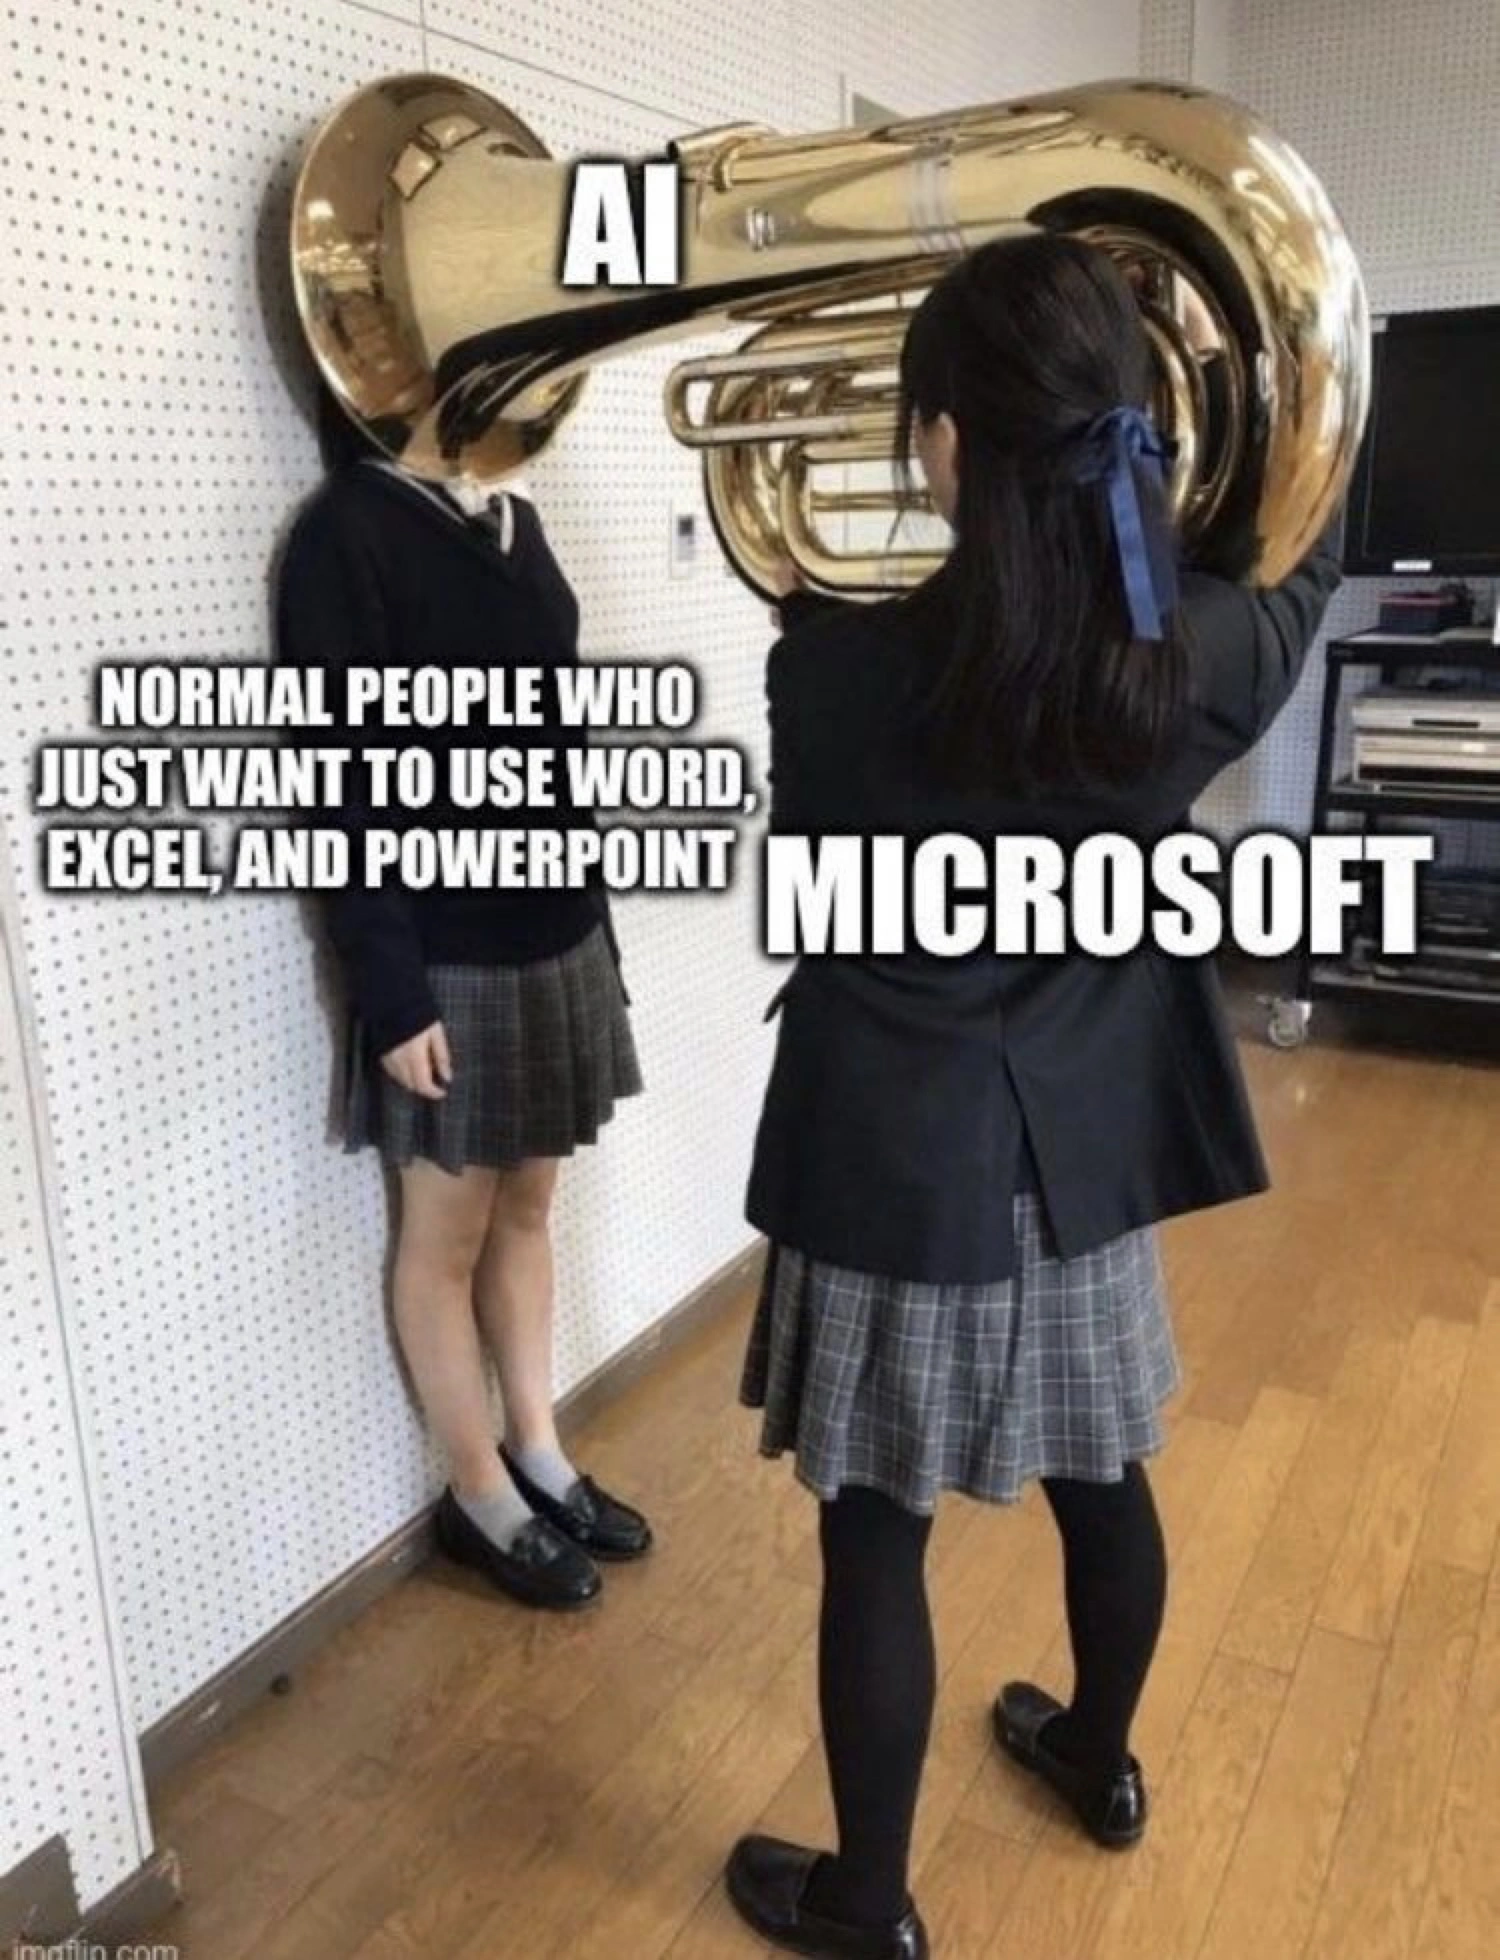 A meme image depicting two schoolgirls in uniforms. One girl holds a large tuba with the bell covering the other girl’s head. The tuba is labeled “AI,” the girl holding the tuba is labeled “Microsoft,” and the girl with her head inside the tuba is labeled “Normal people who just want to use Word, Excel, and PowerPoint.” Meme via <a href='https://www.facebook.com/docsearls/posts/pfbid02TeaTY64wqEZuSdUdMop56brGSykArpUj91GN9me8YWeE4YshRktu9UXv6rEgdH5Ll'>Facebook</a>